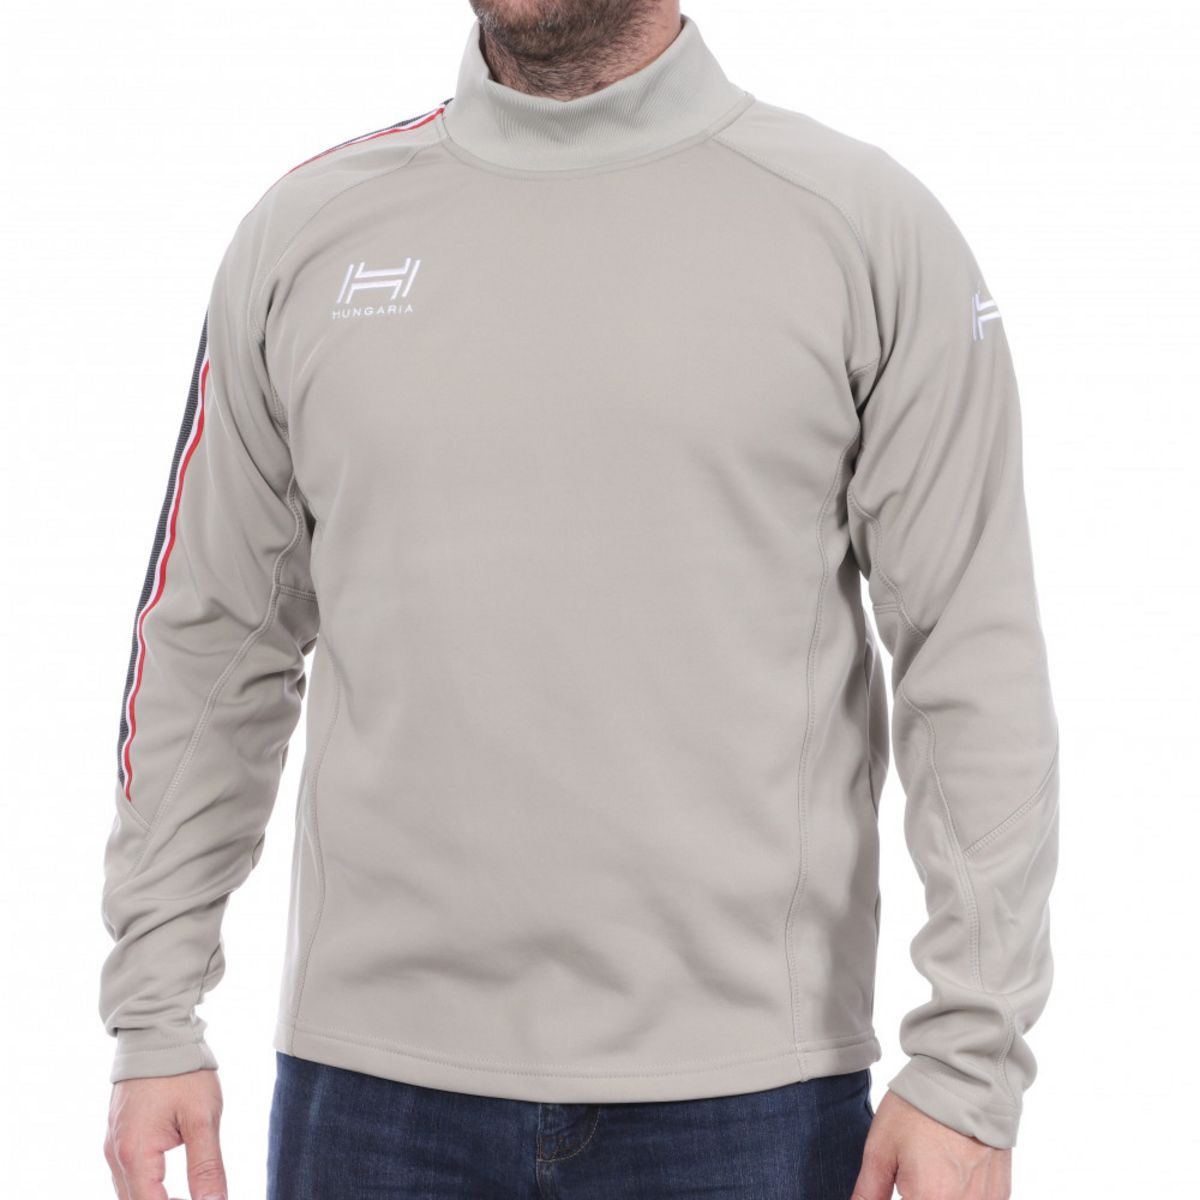 HUNGARIA Sweat gris/rouge homme Hungaria Training Pro 15